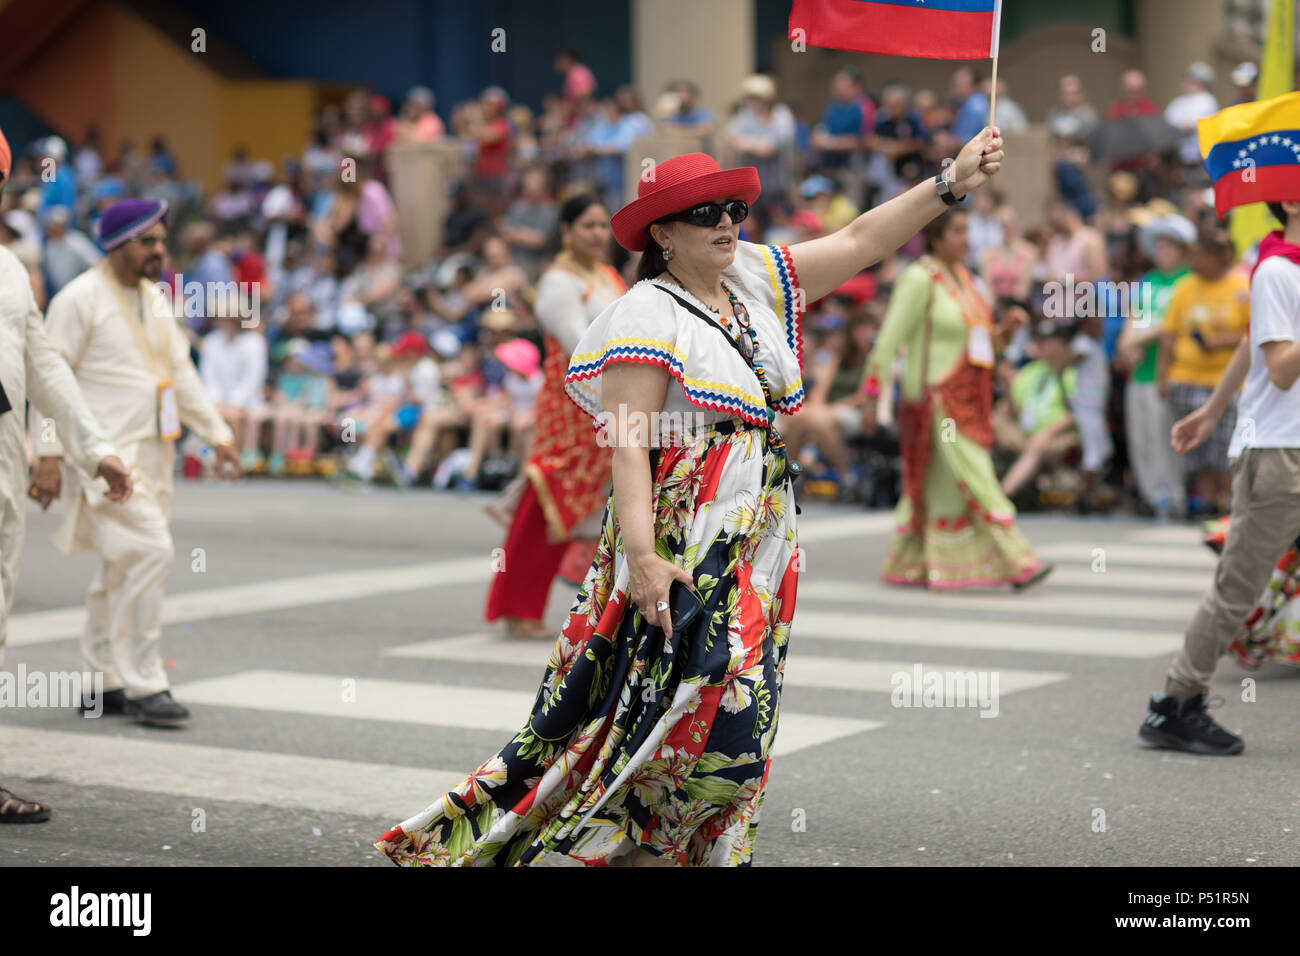 Indianapolis, Indiana, USA - May 26, 2018,  People from different countries with traditional clothing and carrying national flags at the Indy 500 Para Stock Photo